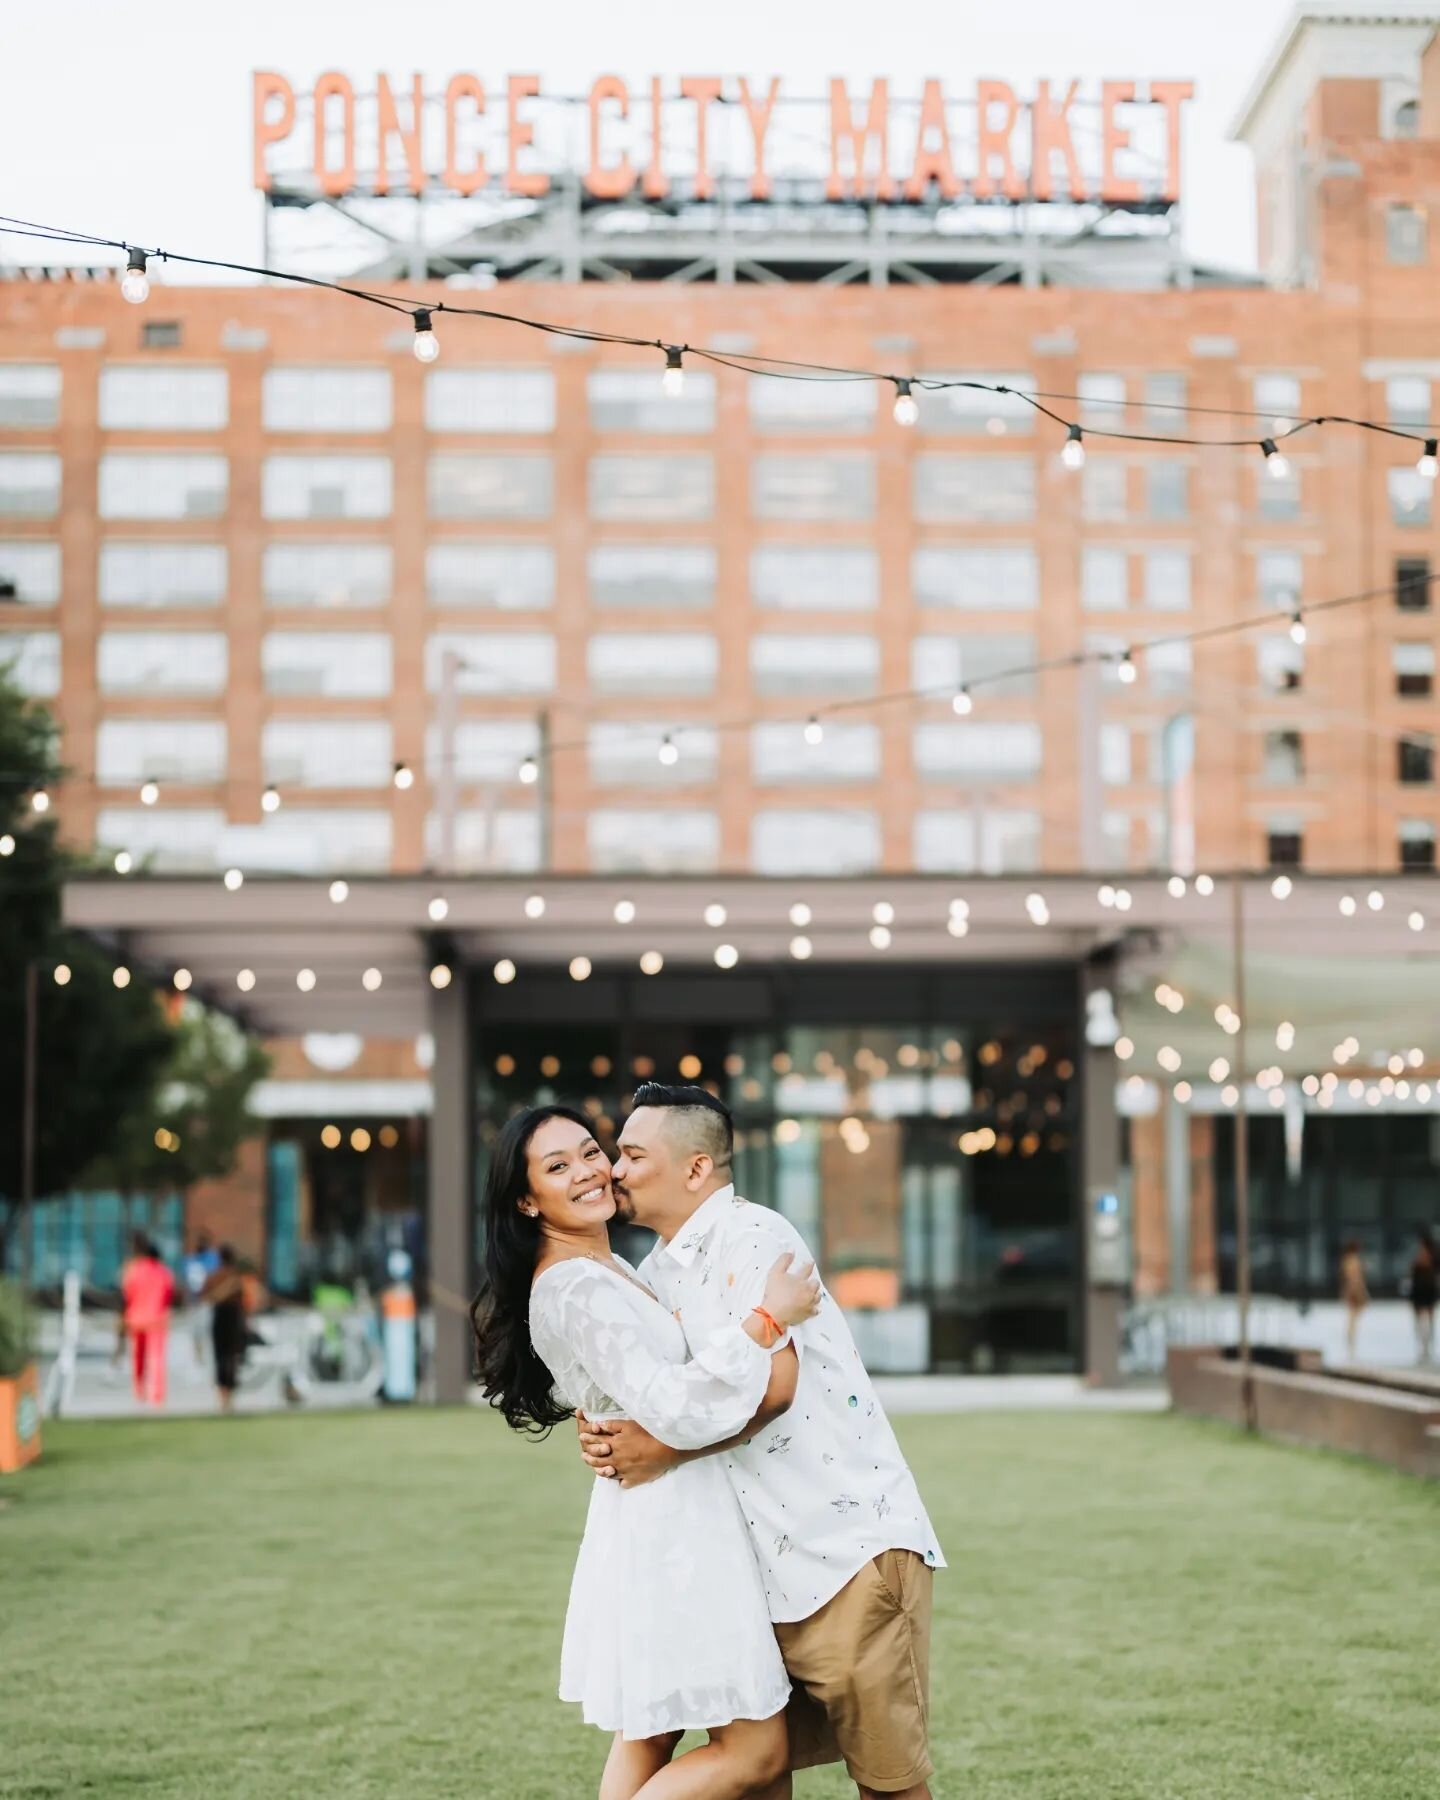 When in Atlanta, one must take amazing engagement photo sessions with an Atlanta native photographer. Excited for their traditional AND contemporary wedding in September!